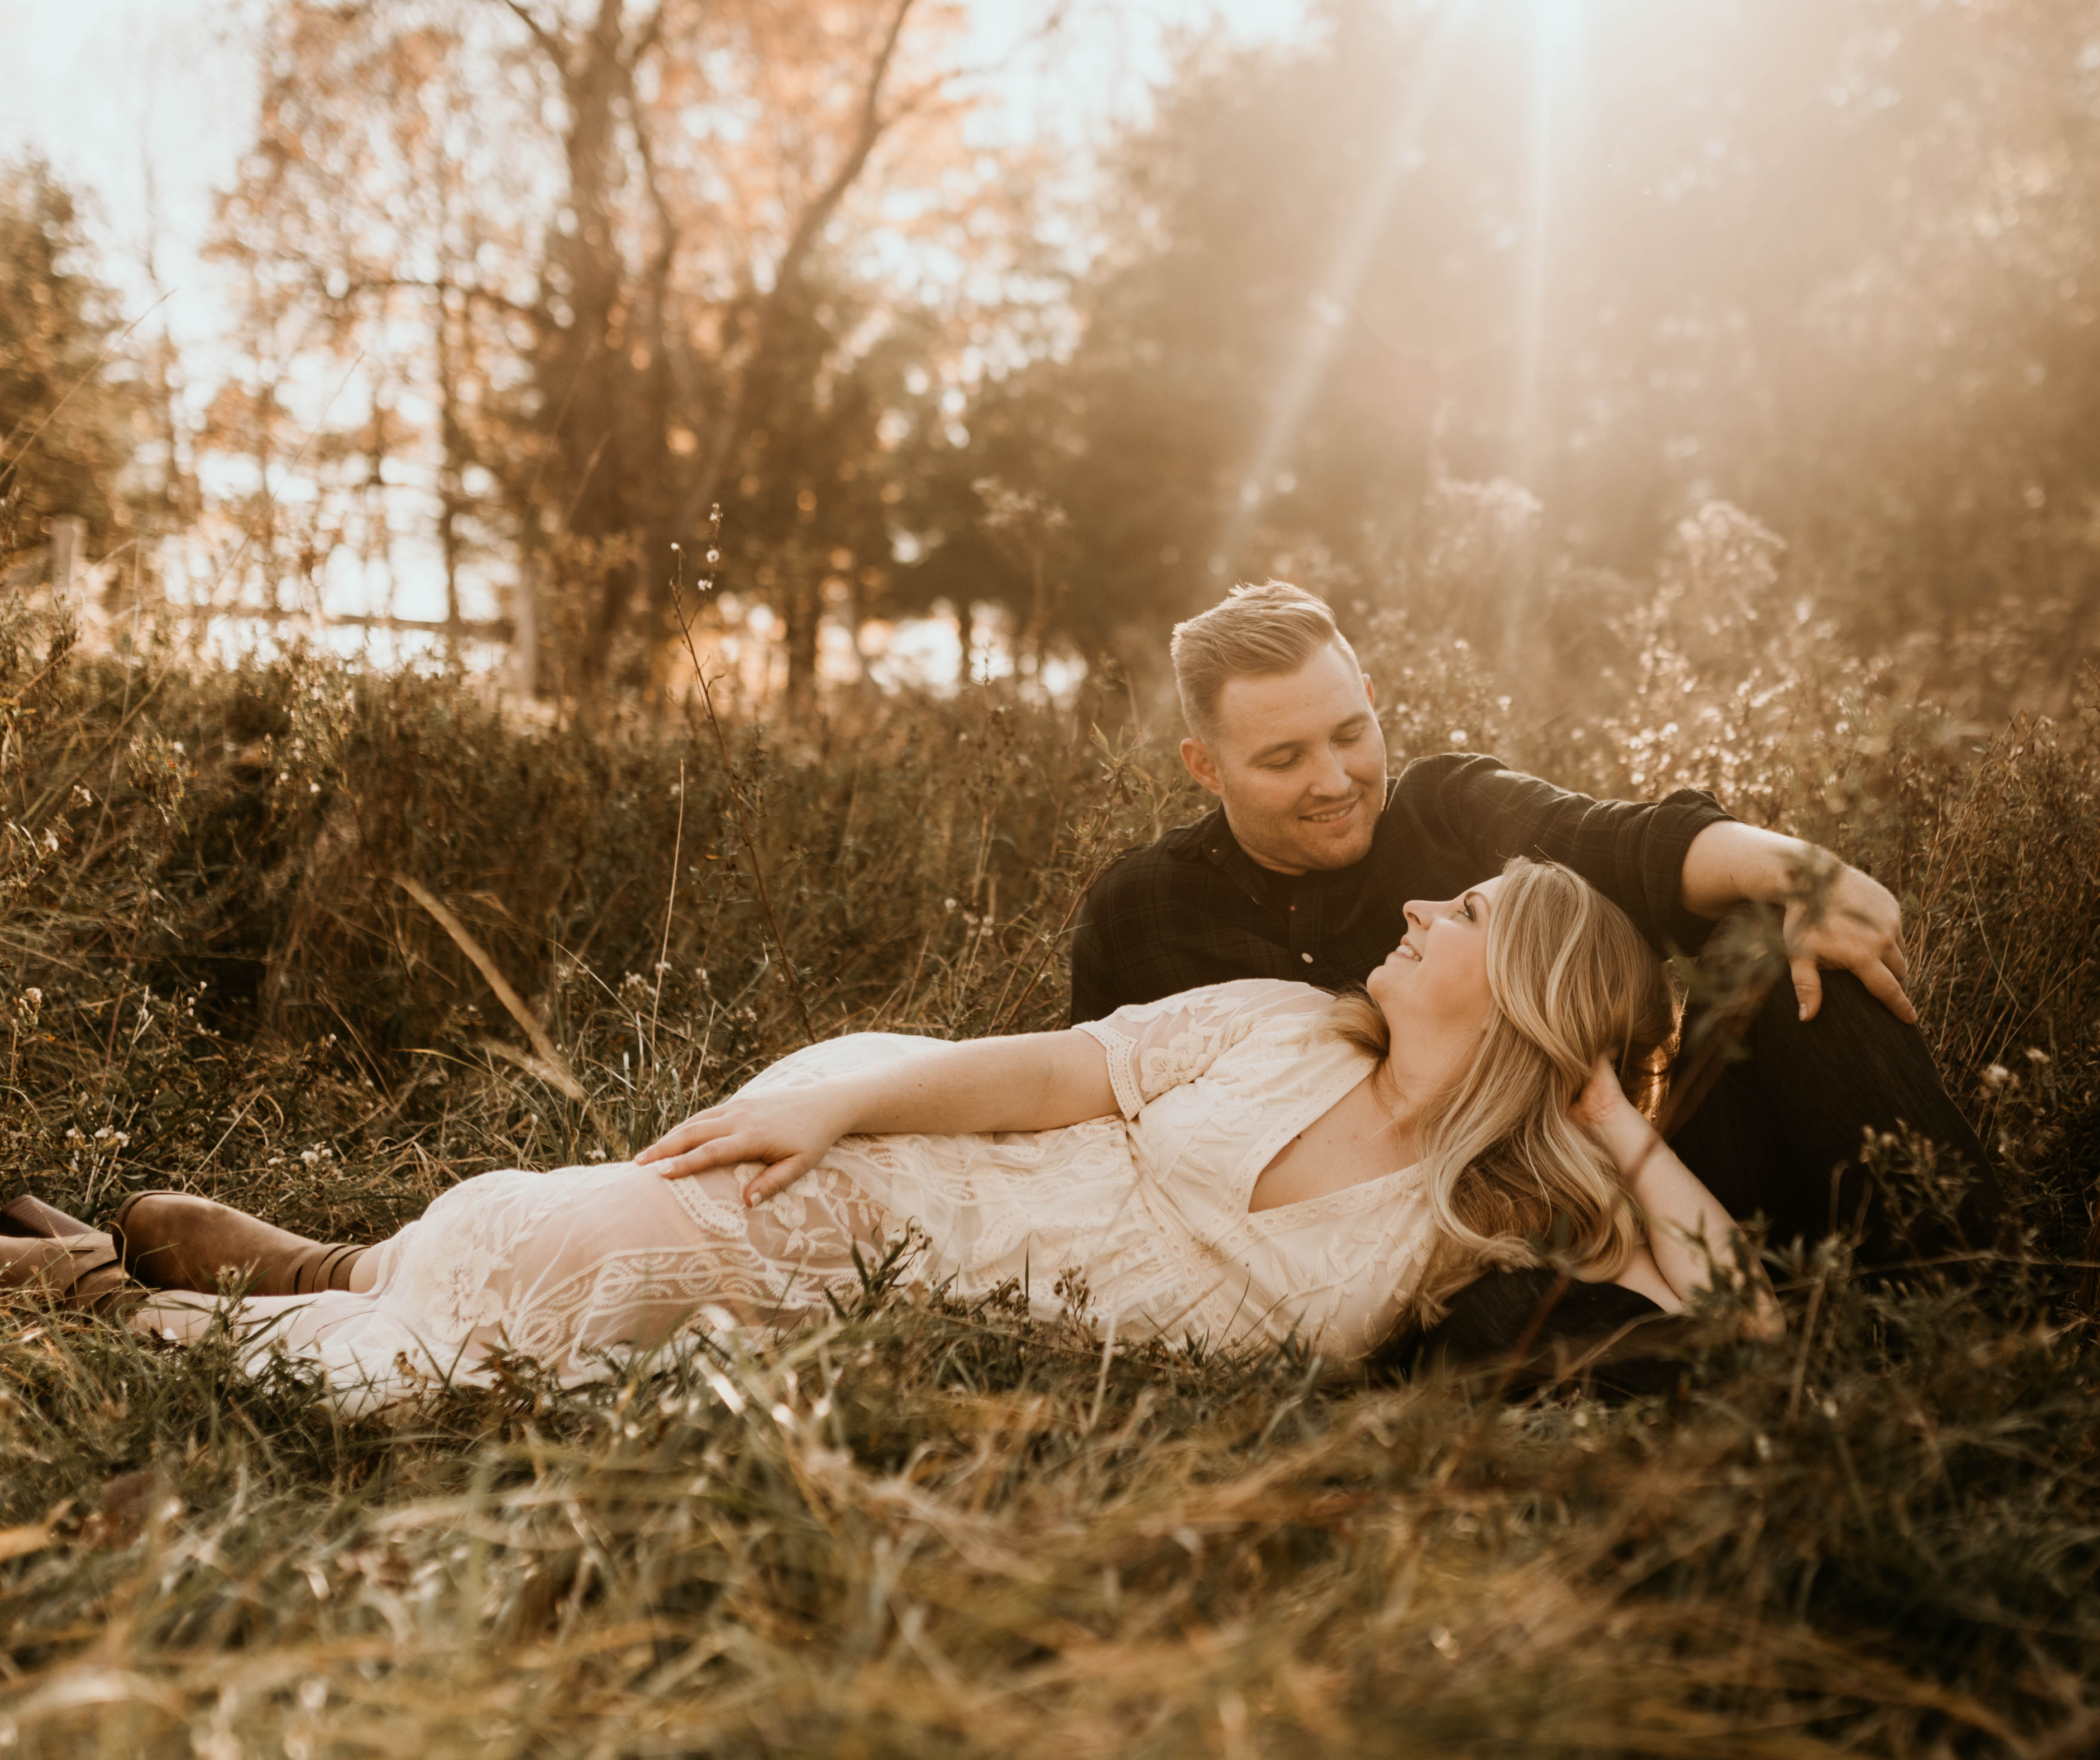 engagement photos at a local park during golden hour - located near cleveland Ohio